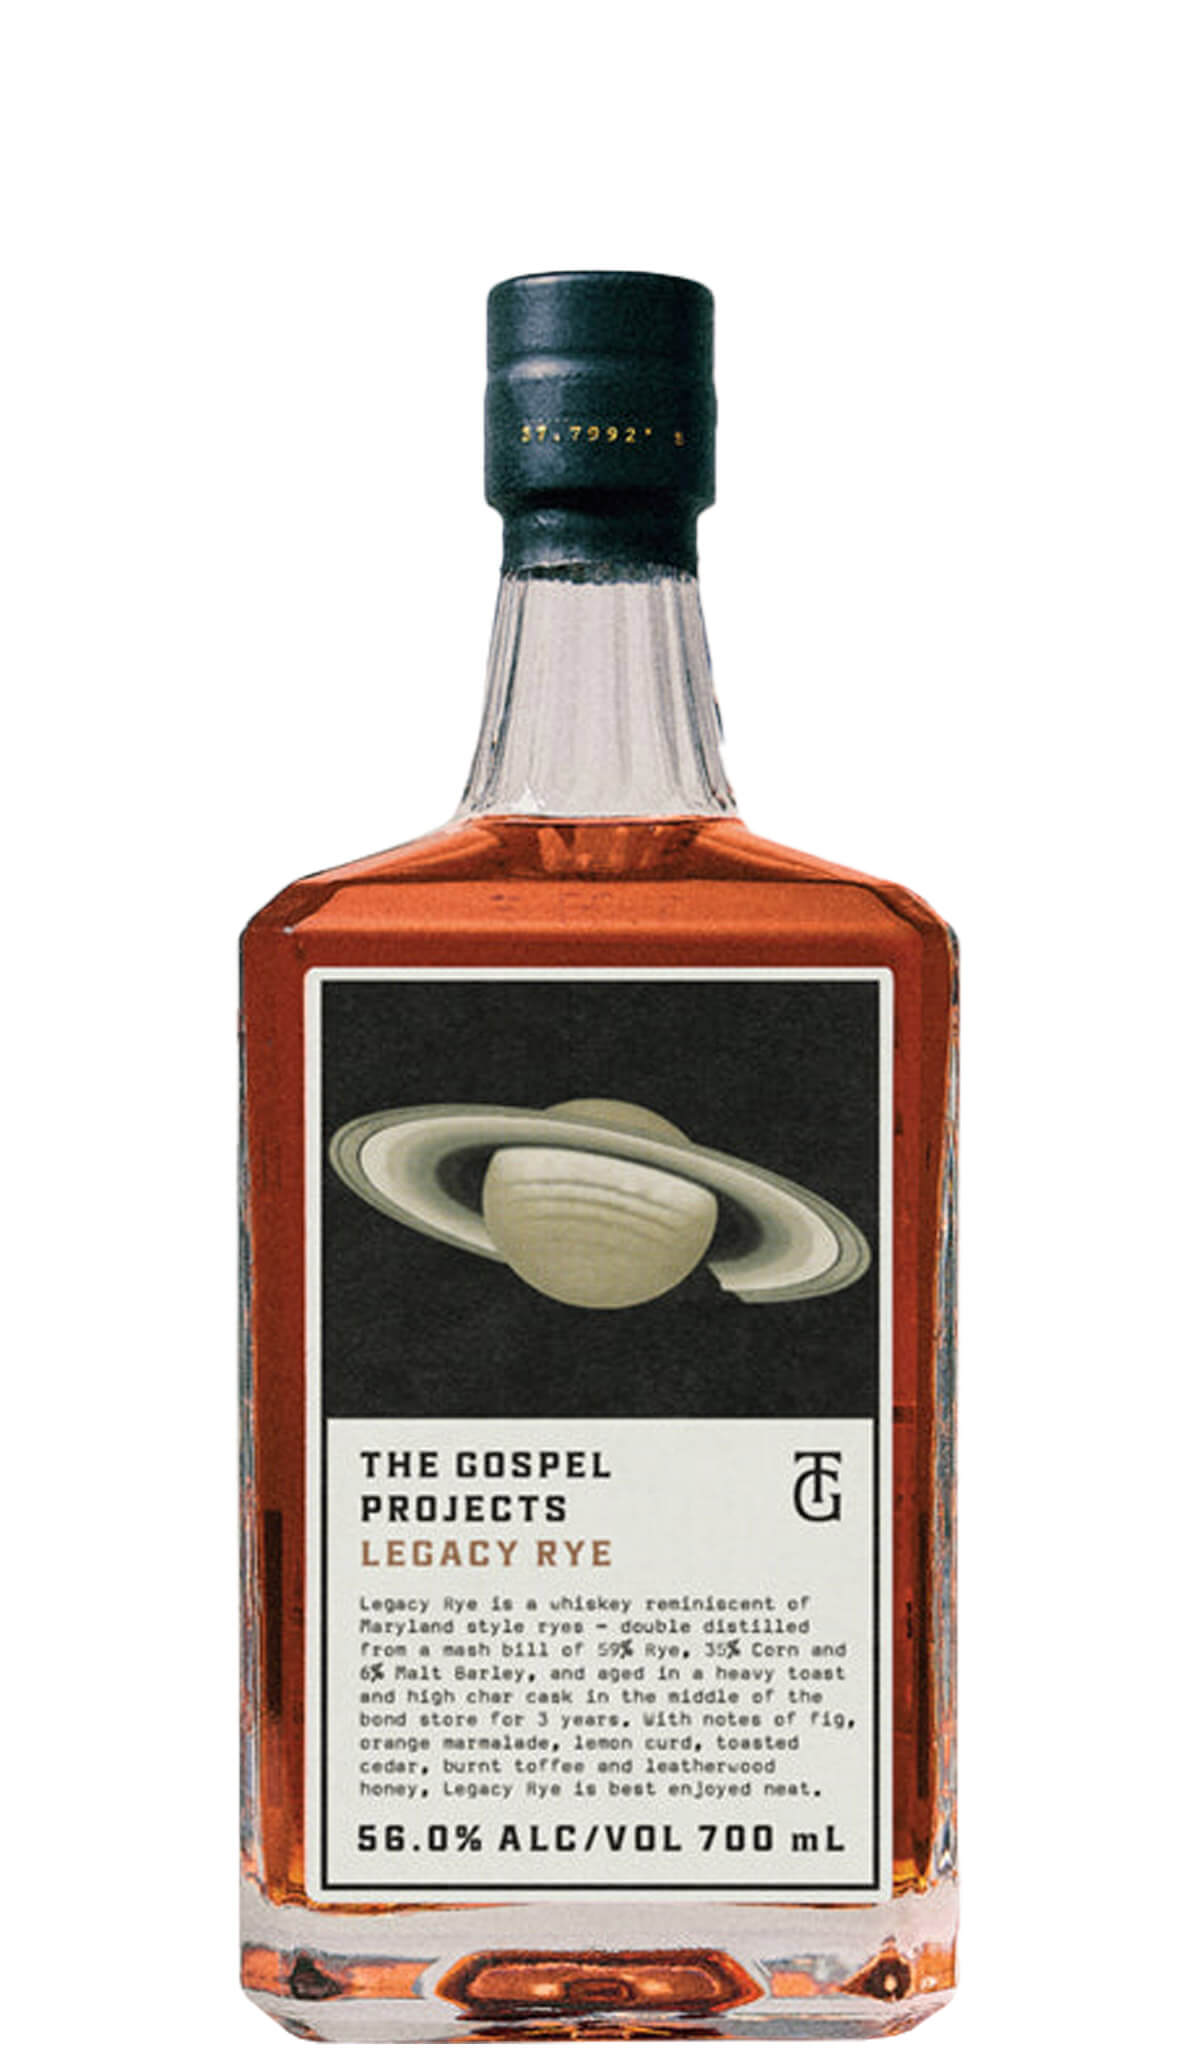 Find out more, explore the range and buy The Gospel Projects Legacy Rye 700mL available online at Wine Sellers Direct - Australia's independent liquor specialists.